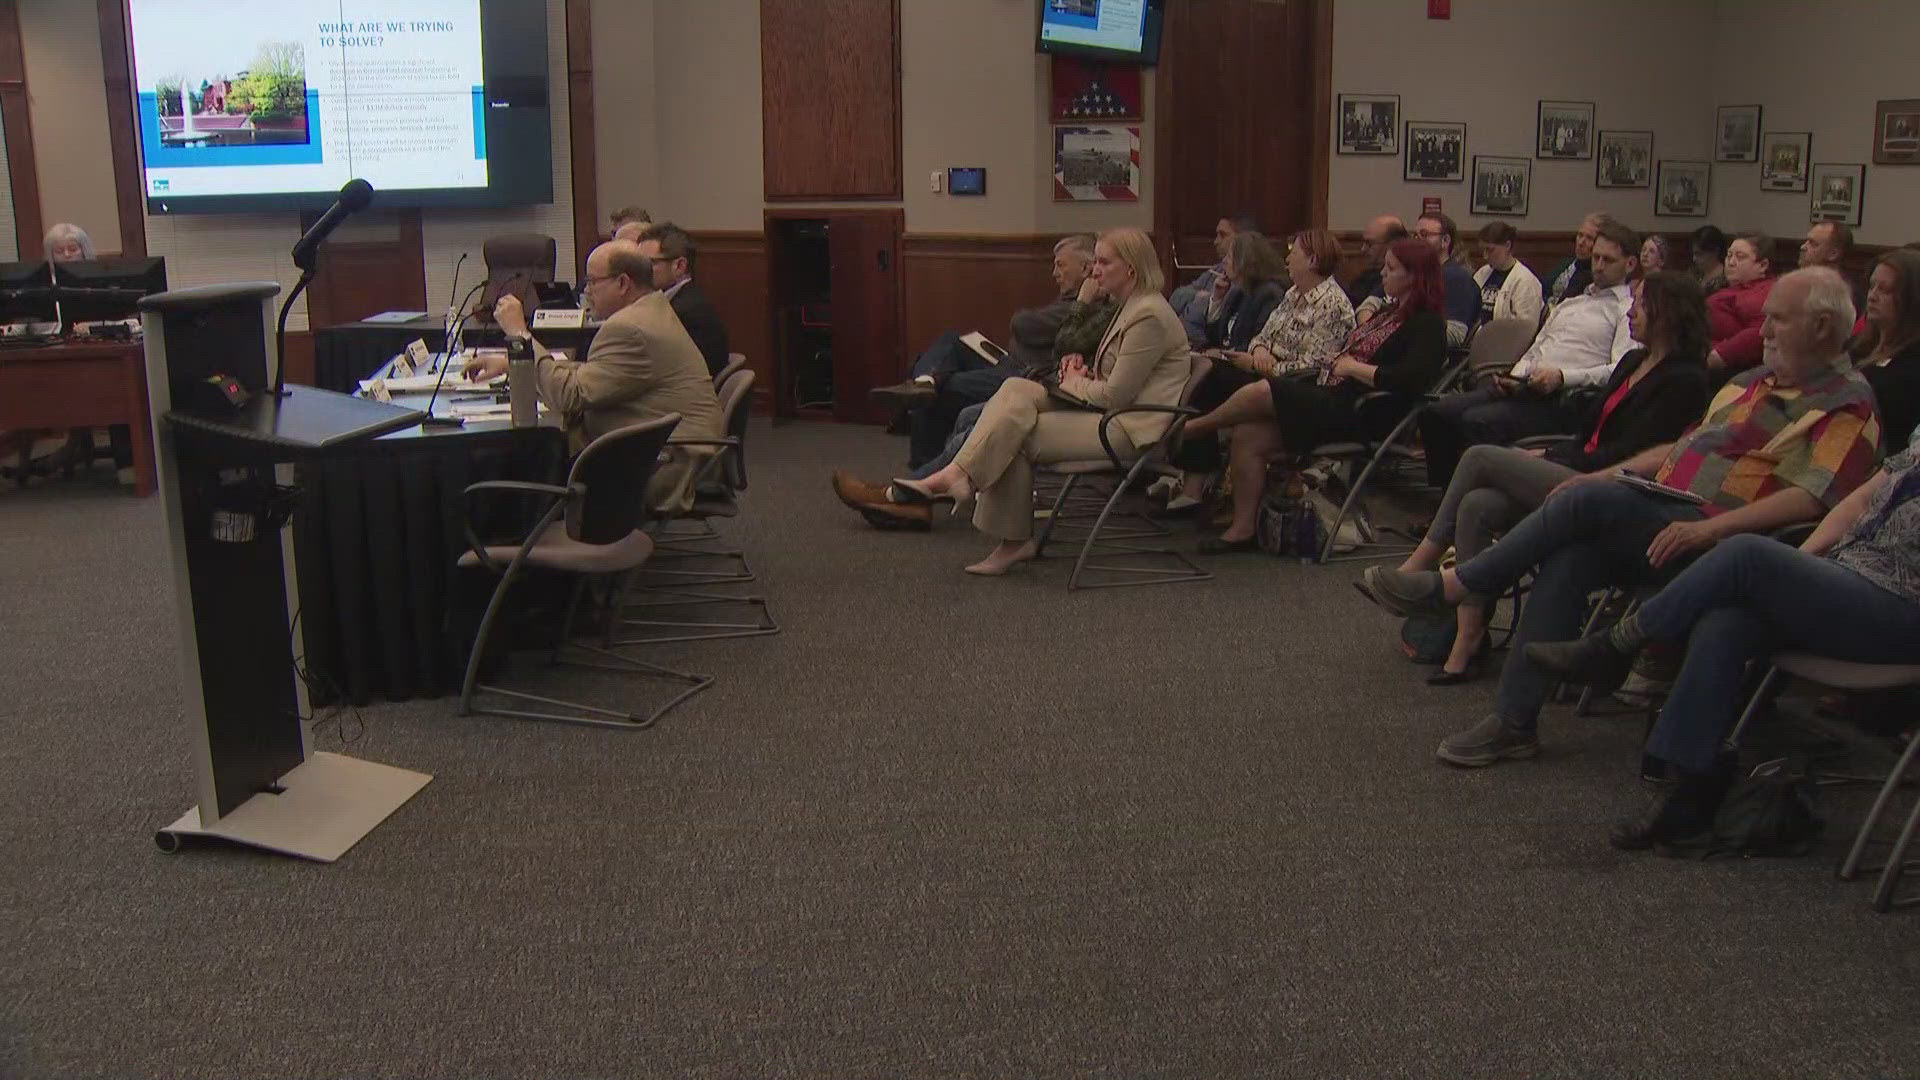 City leaders in Loveland say the city is projected to lose more than $11 million in revenue this year after voters decided to get rid of their grocery sales tax.